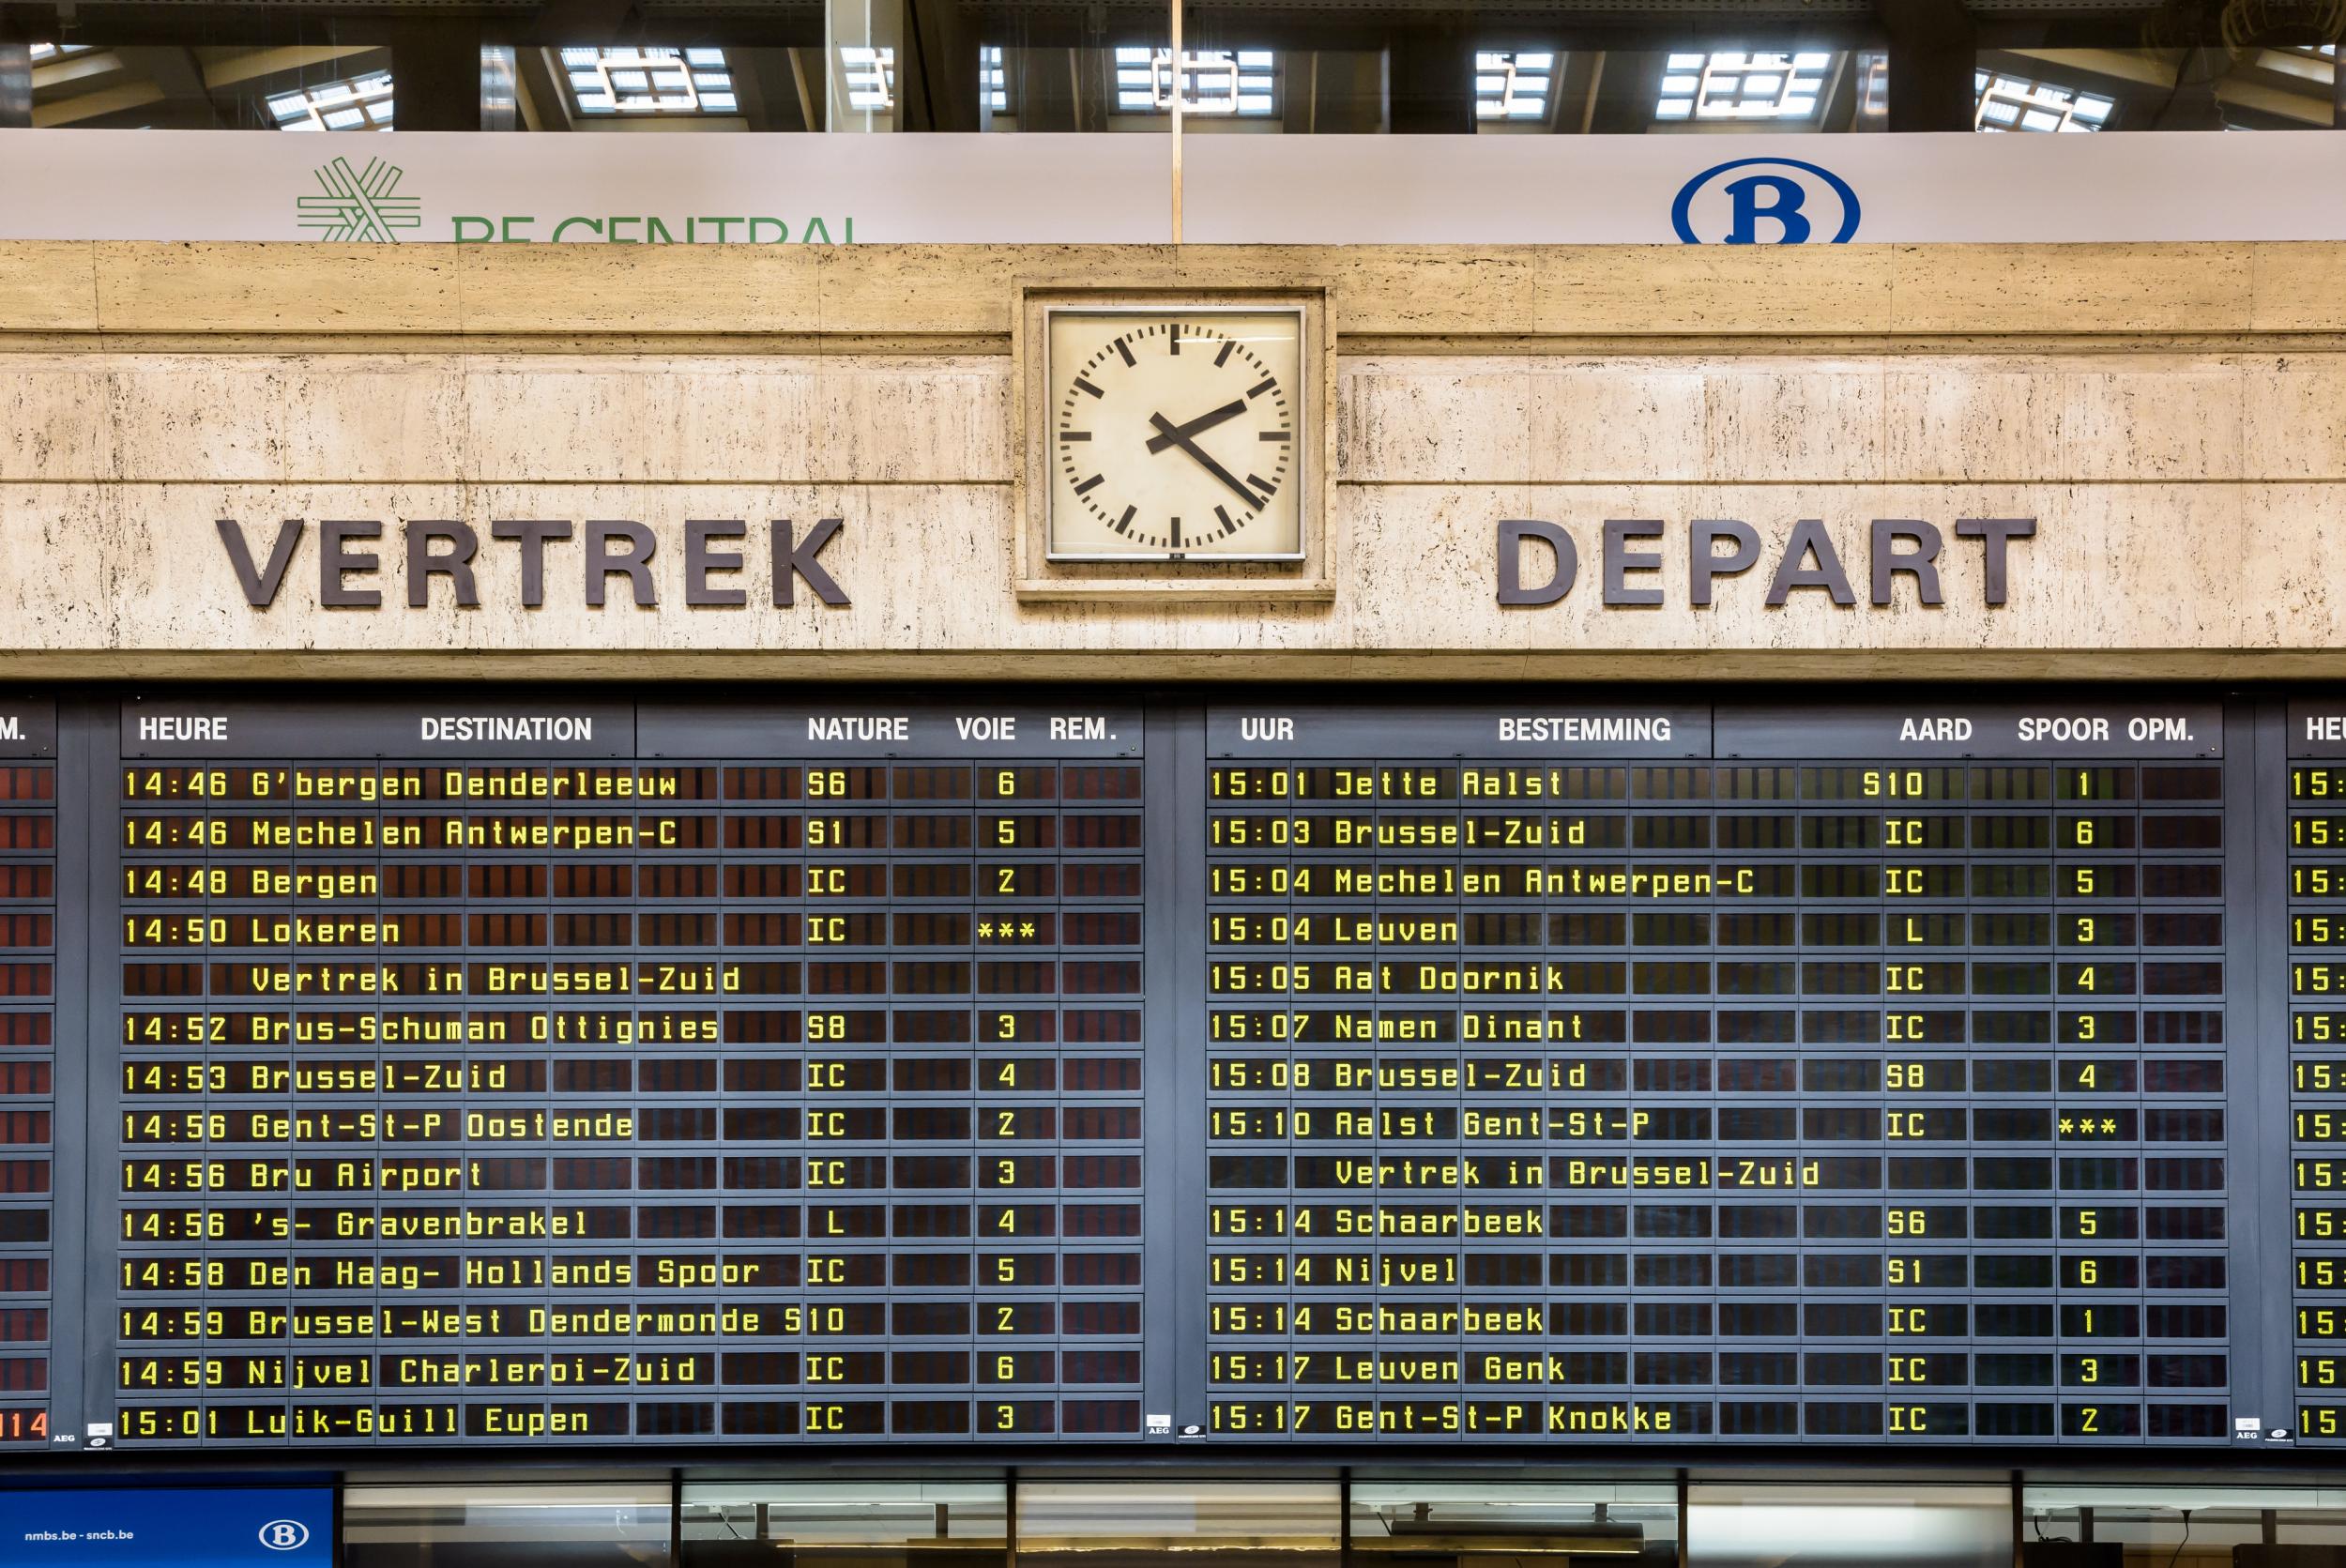 The departures board in Brussels central station